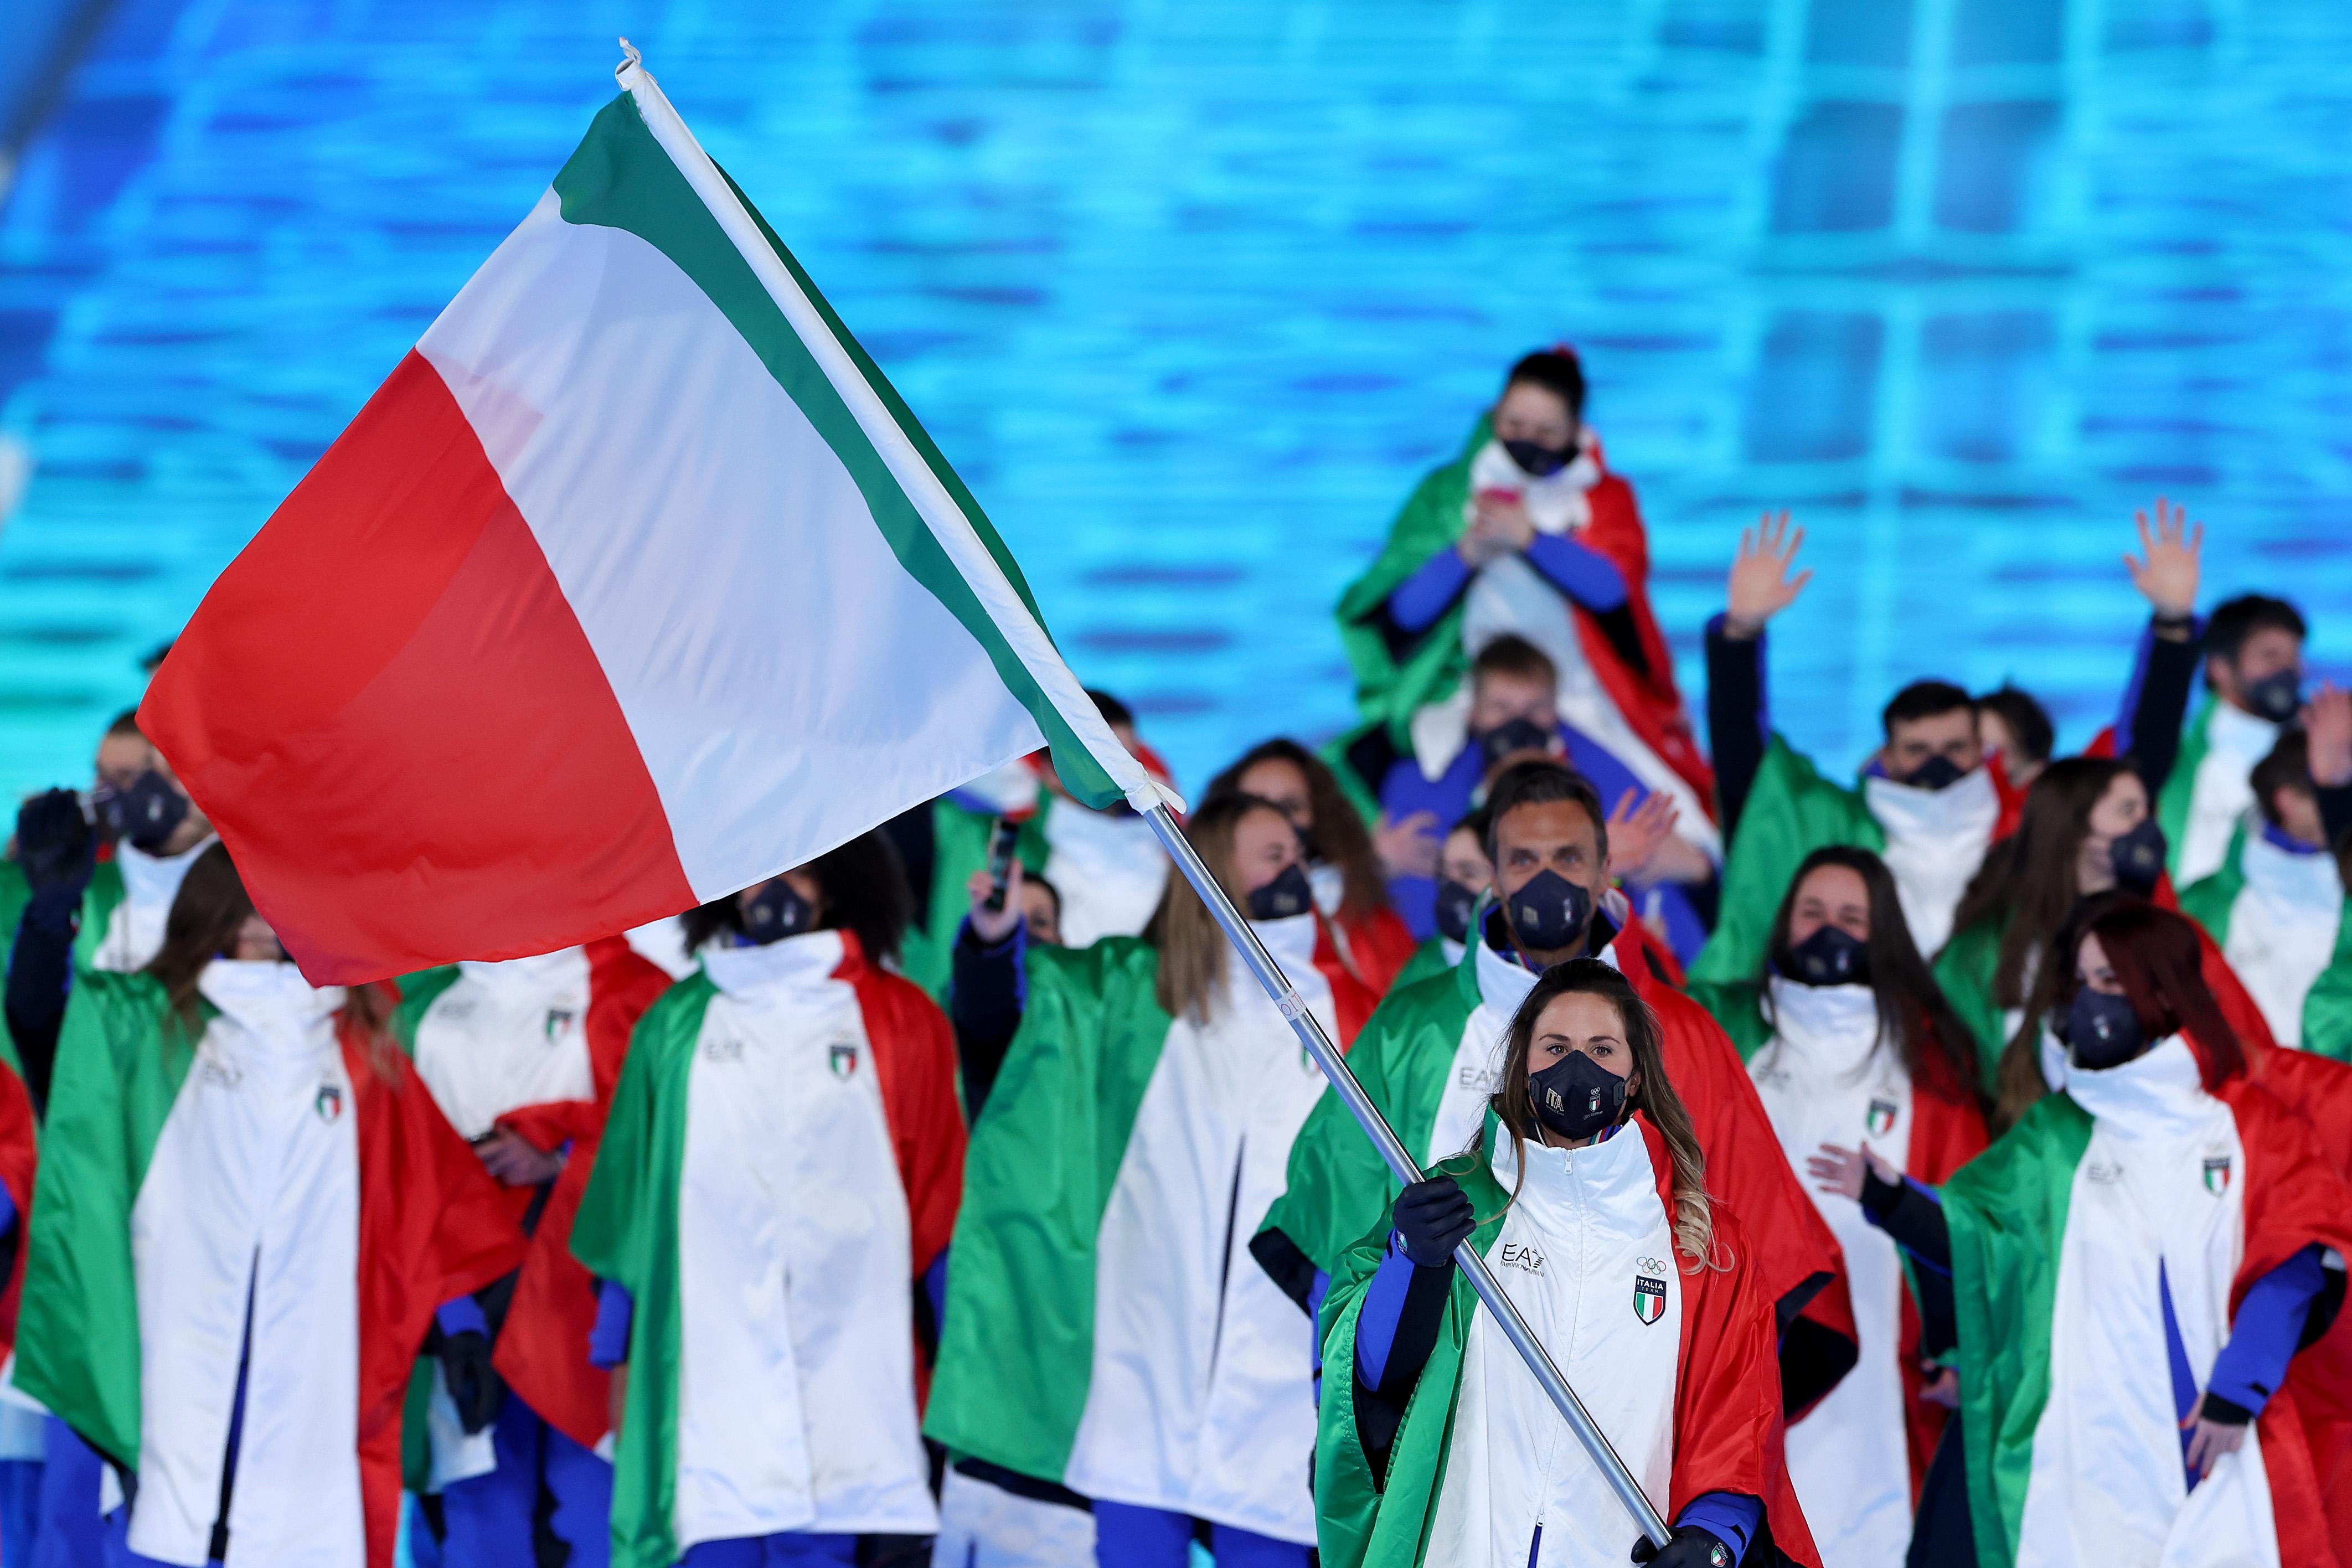 Italy's delegation marches as a group.